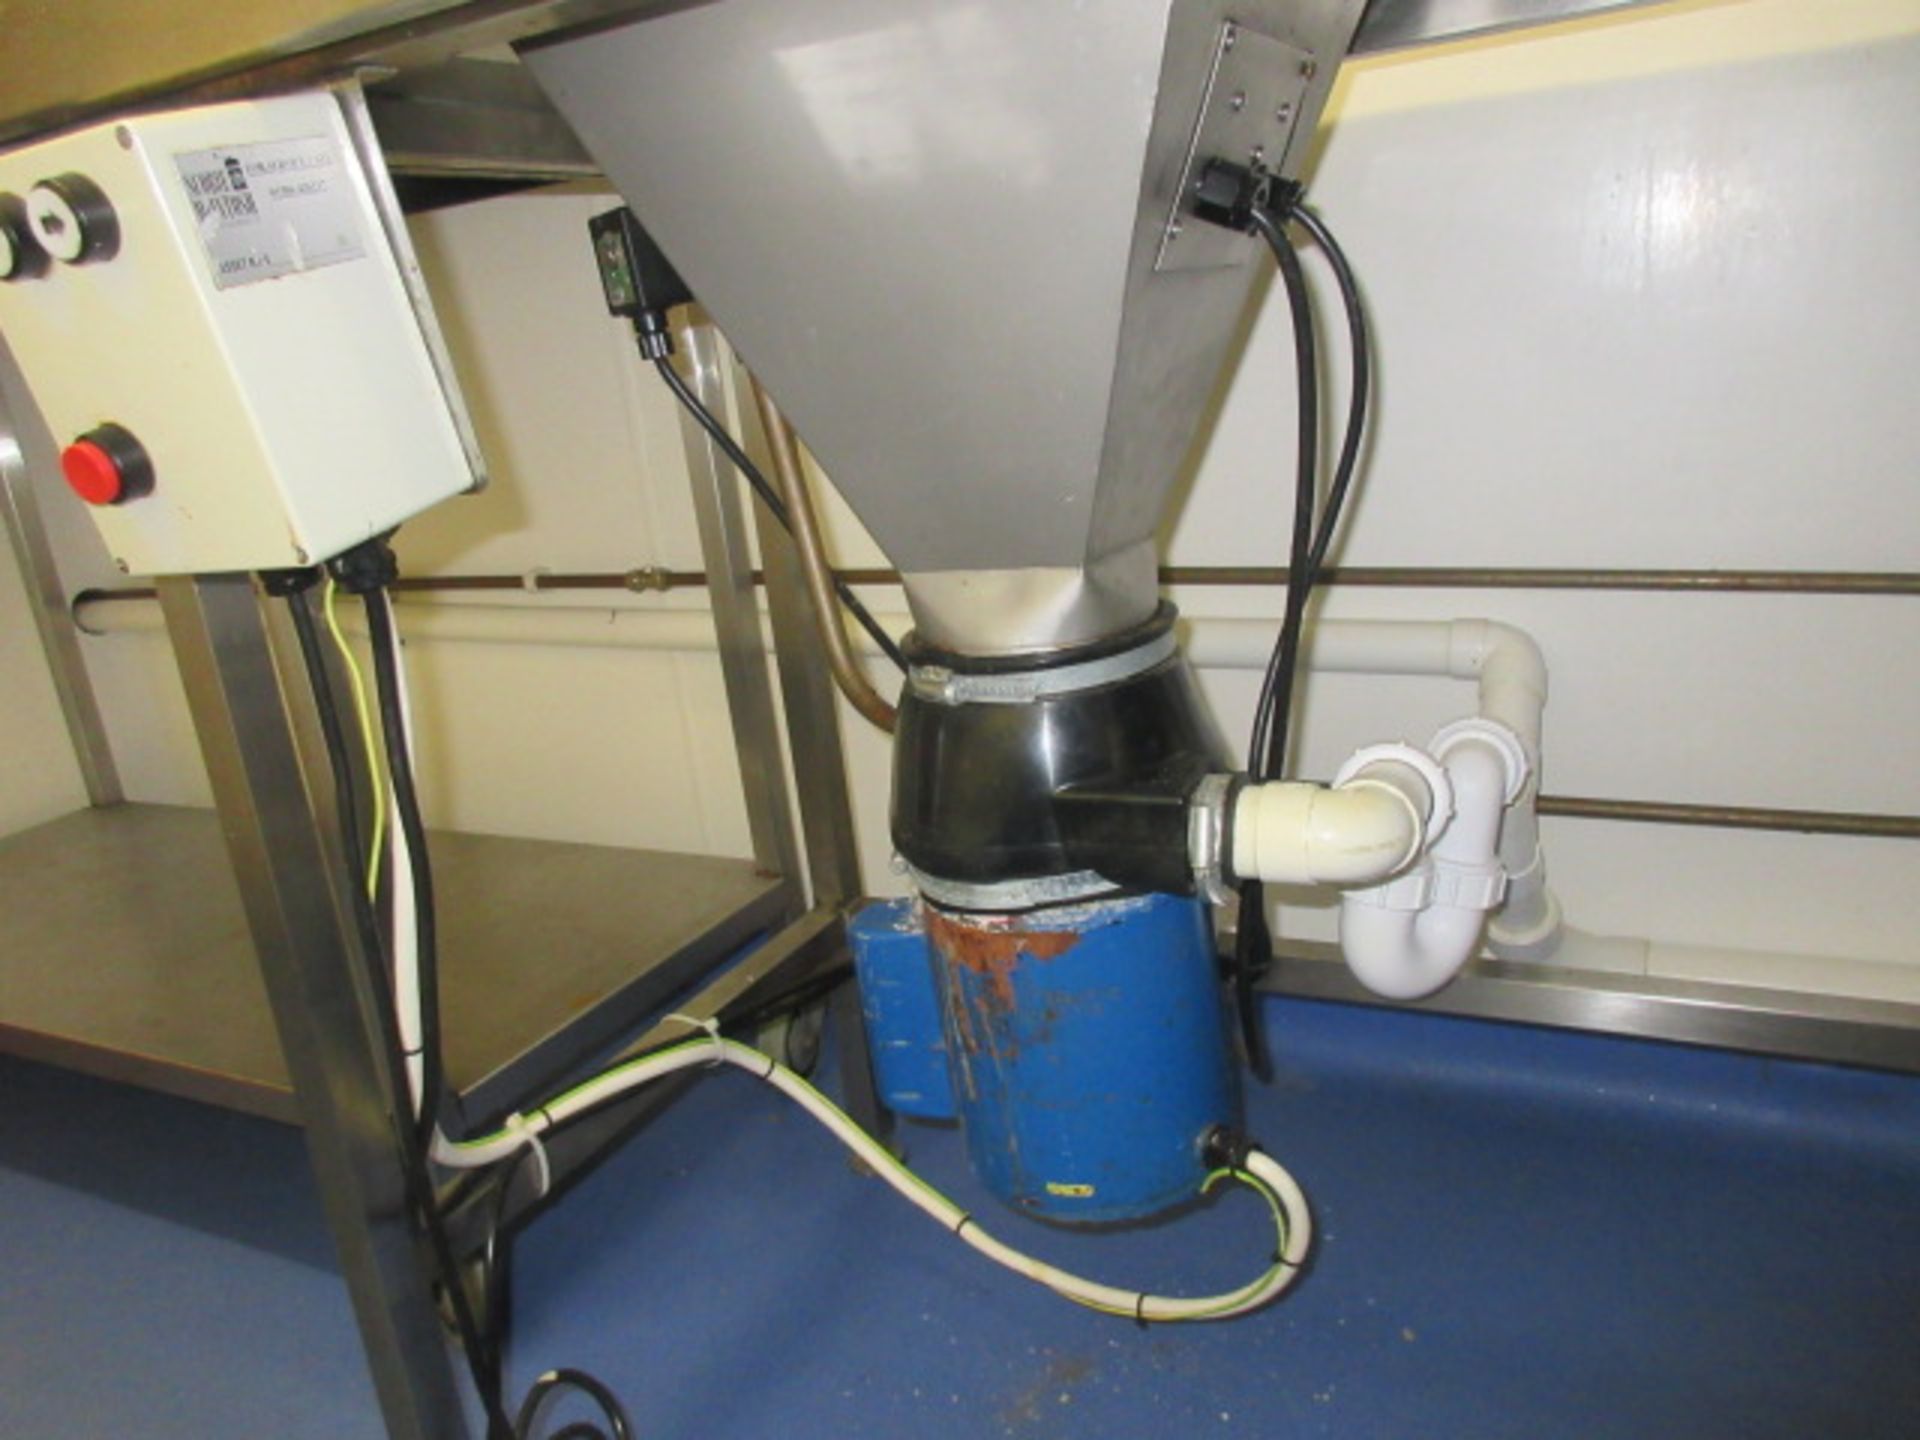 Canteen Wash Down Sink and Waste Disposal Unit Holehouse Road. Gallery canteen. - Image 2 of 4